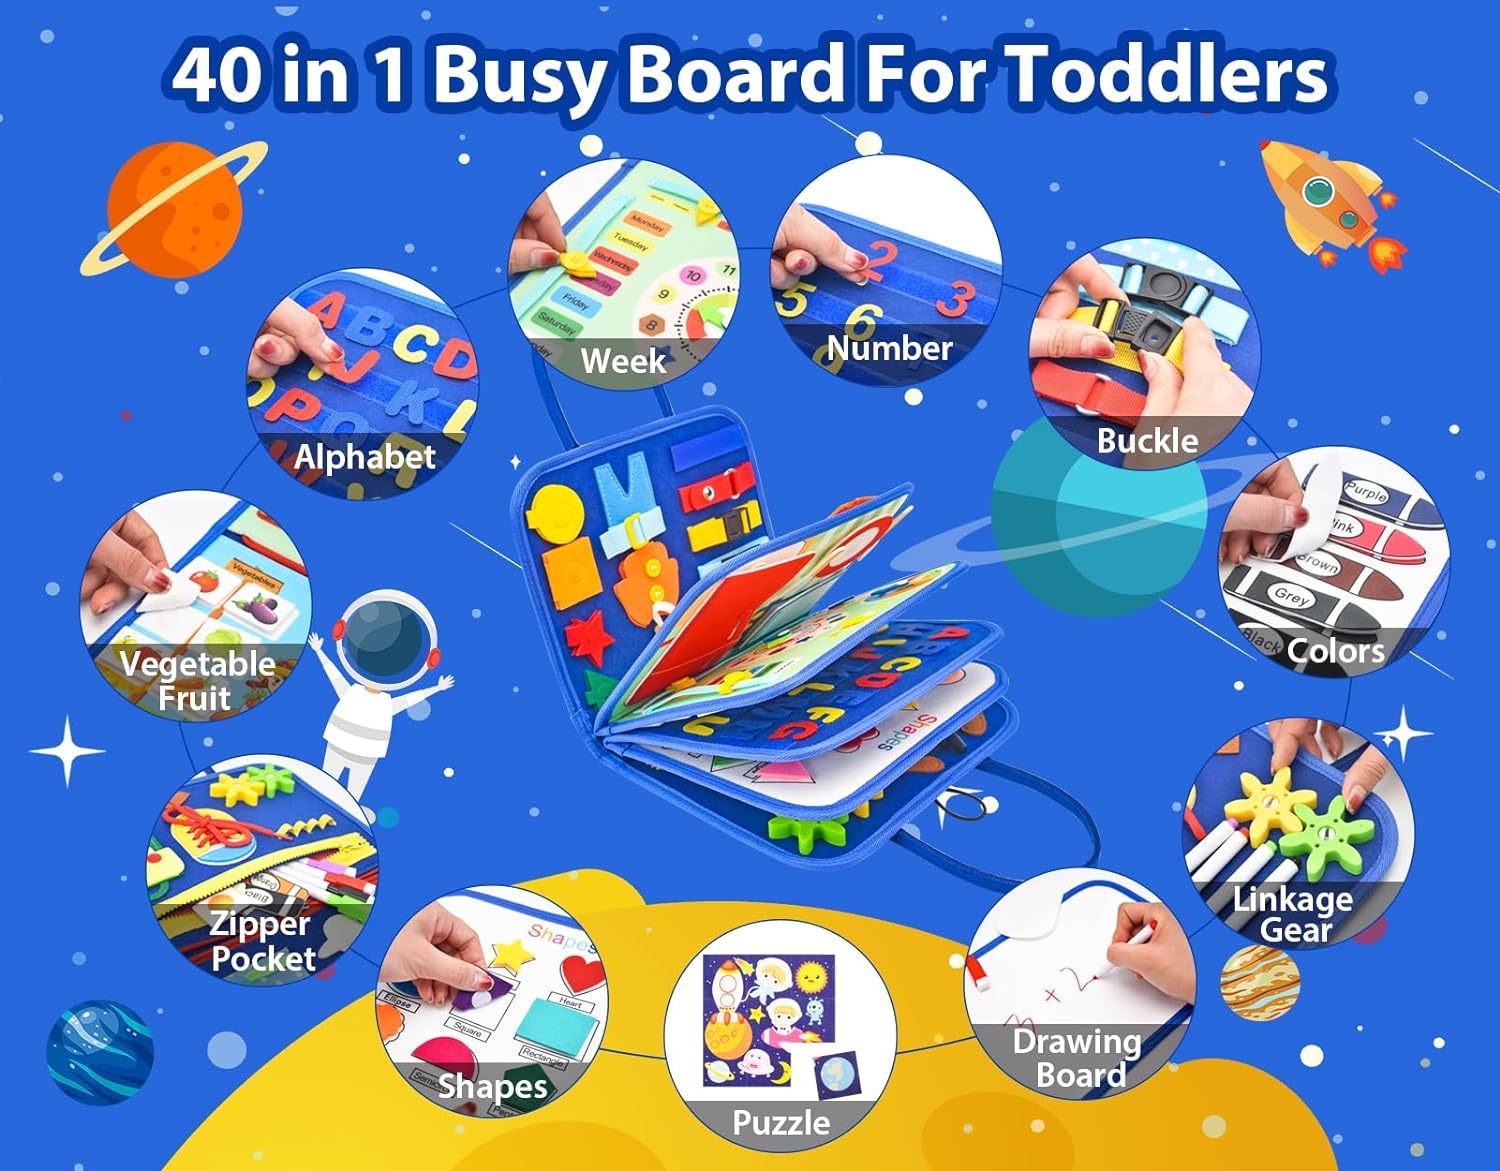 14 Pages Busy Board for Toddlers 2-4,Montessori Travel Toy for Plane/Car,Educational Sensory Toy for Toddlers 1-3,Preschool Activities Board for Developing Fine Motor Skills,Gift for Boys/Girls